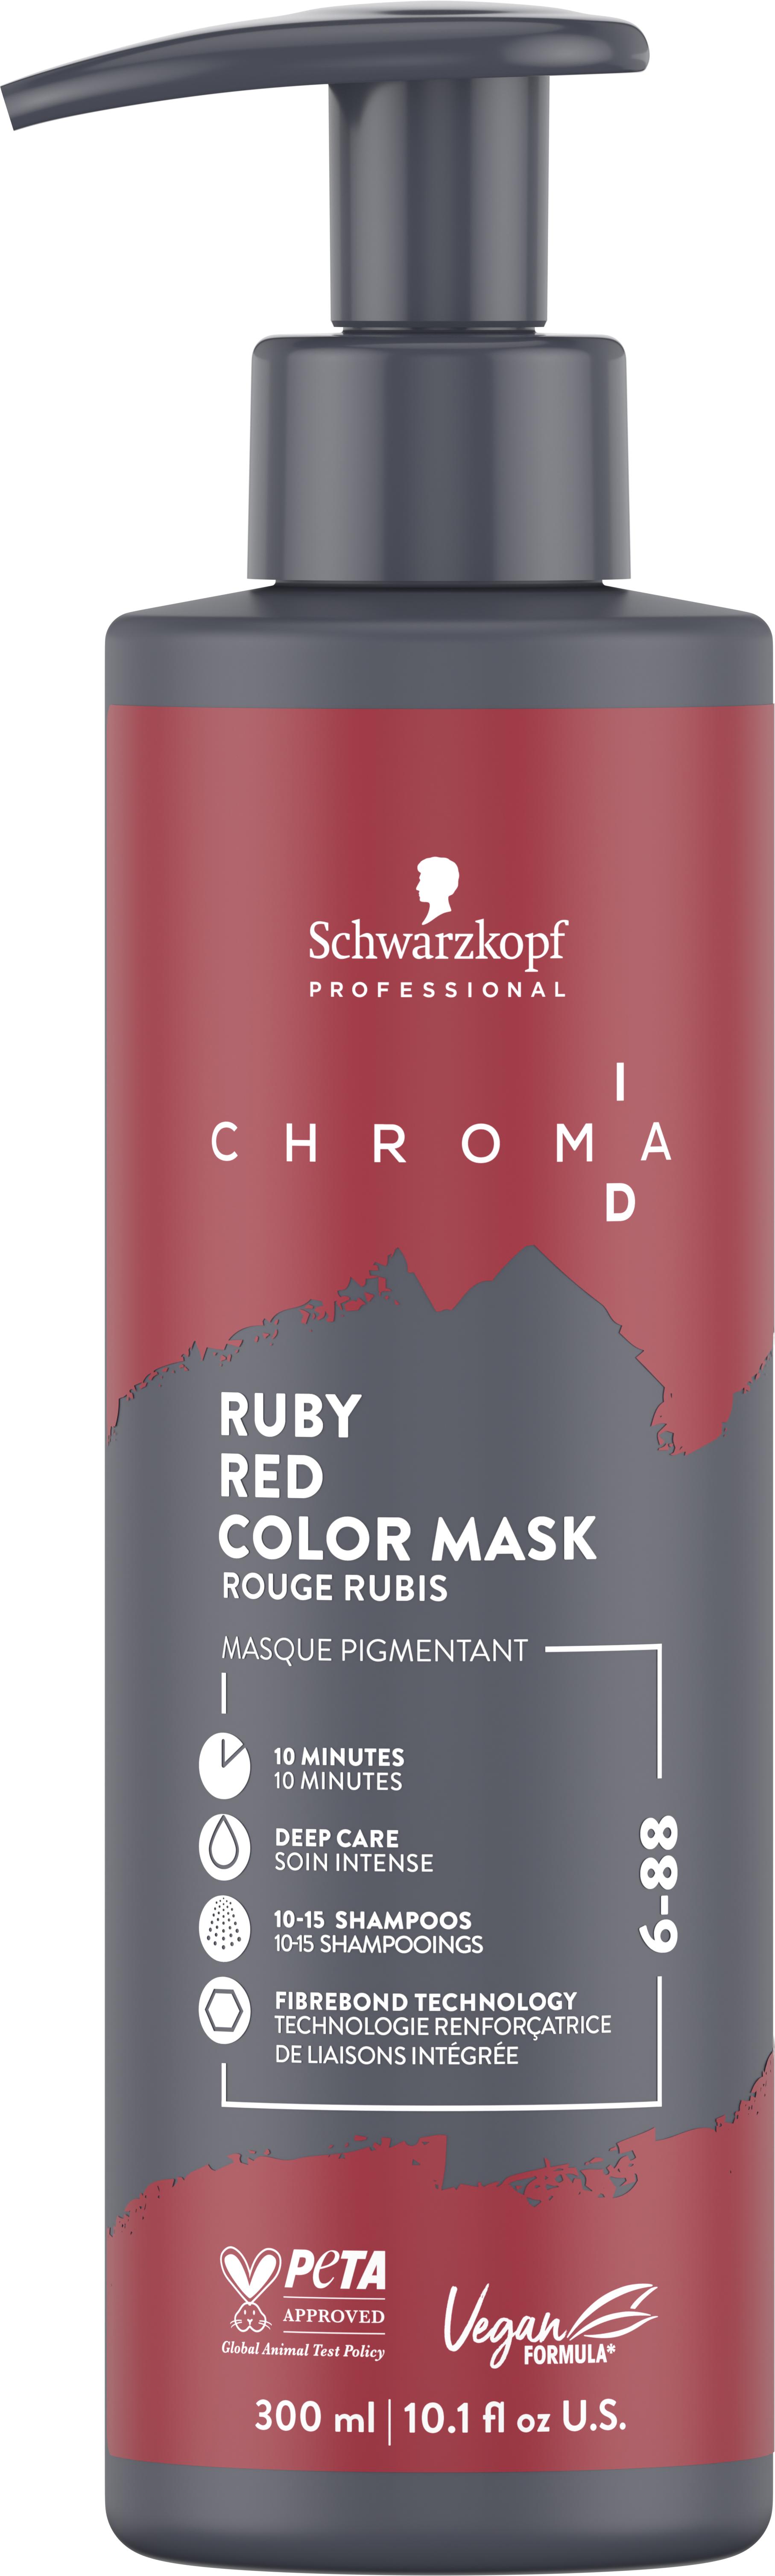 Chroma ID - Bonding Color Mask 6-88 Ruby Red